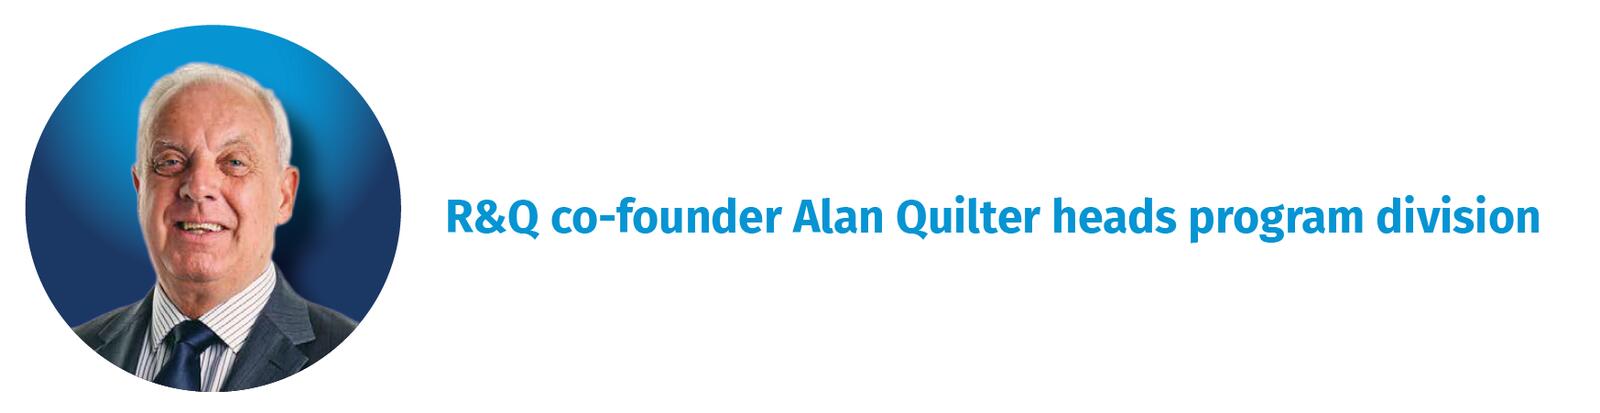 R&Q co-founder Alan Quilter heads program division